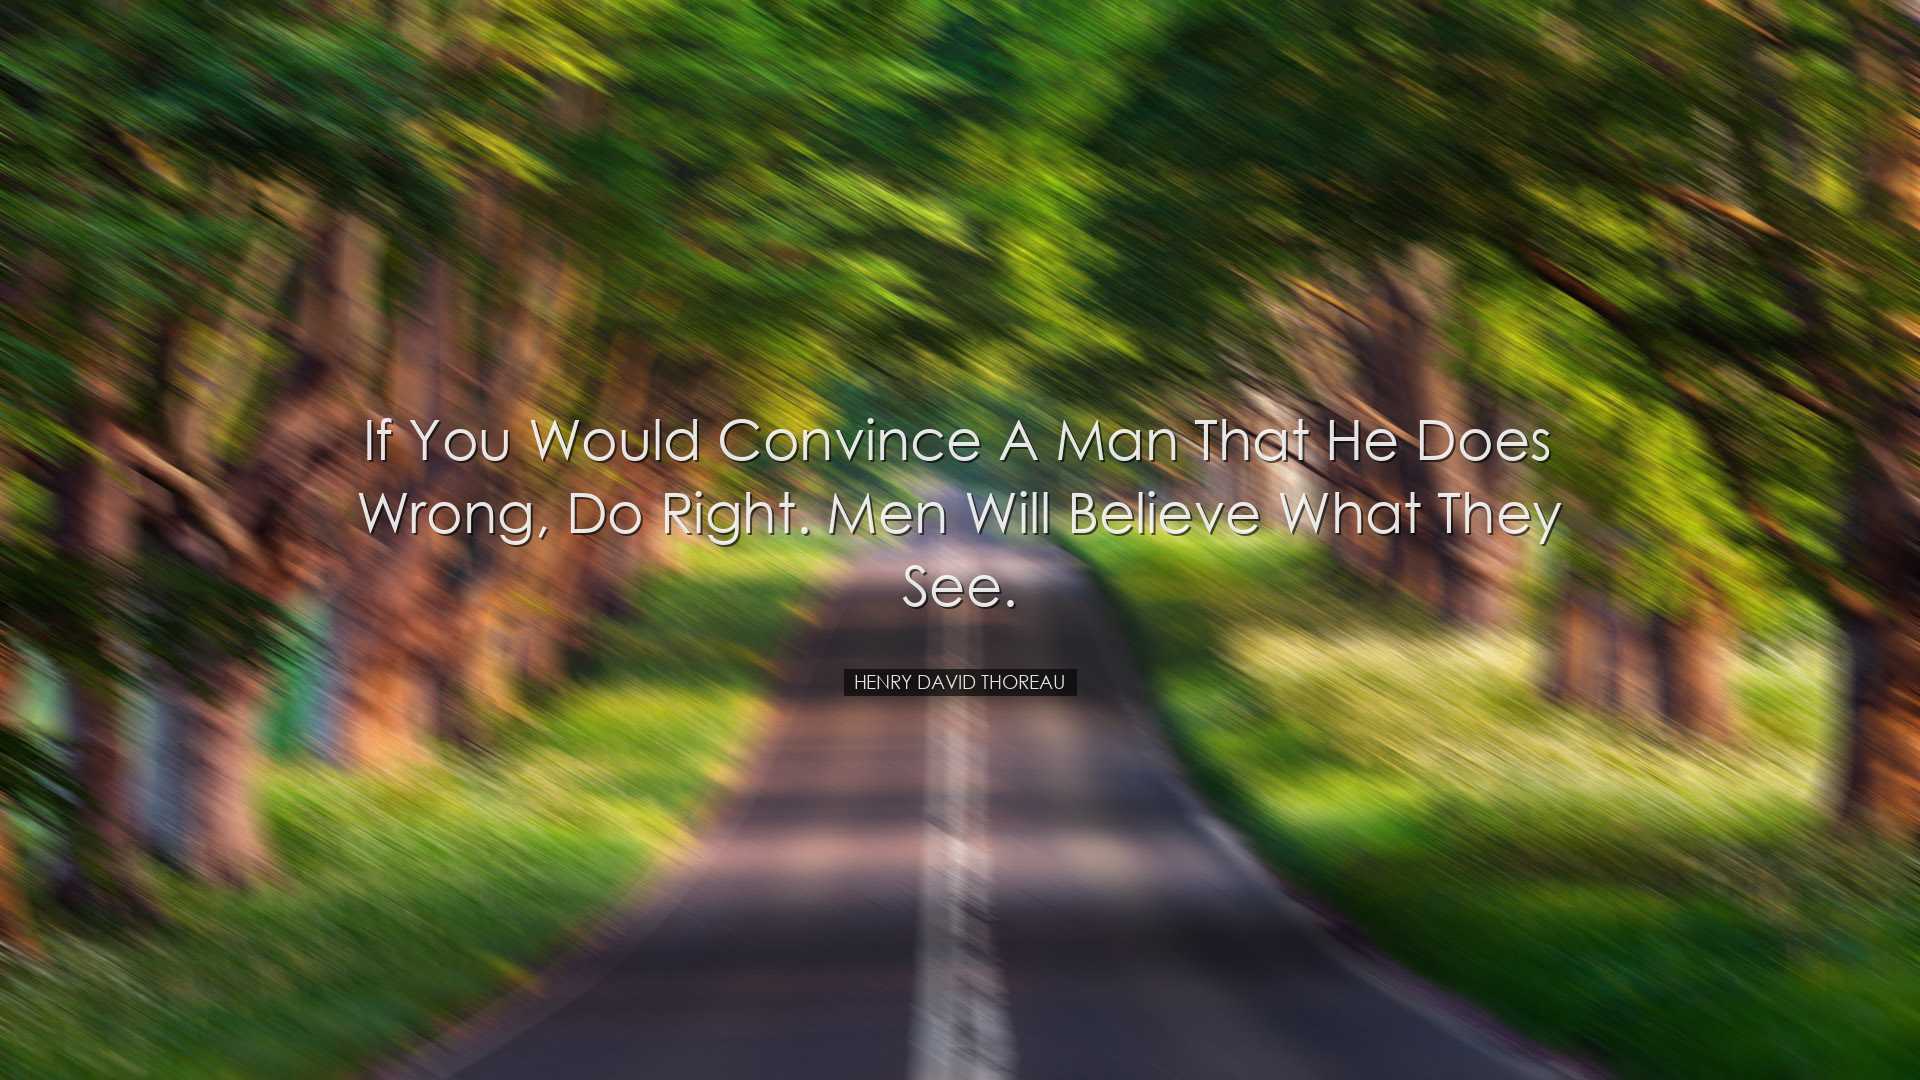 If you would convince a man that he does wrong, do right. Men will